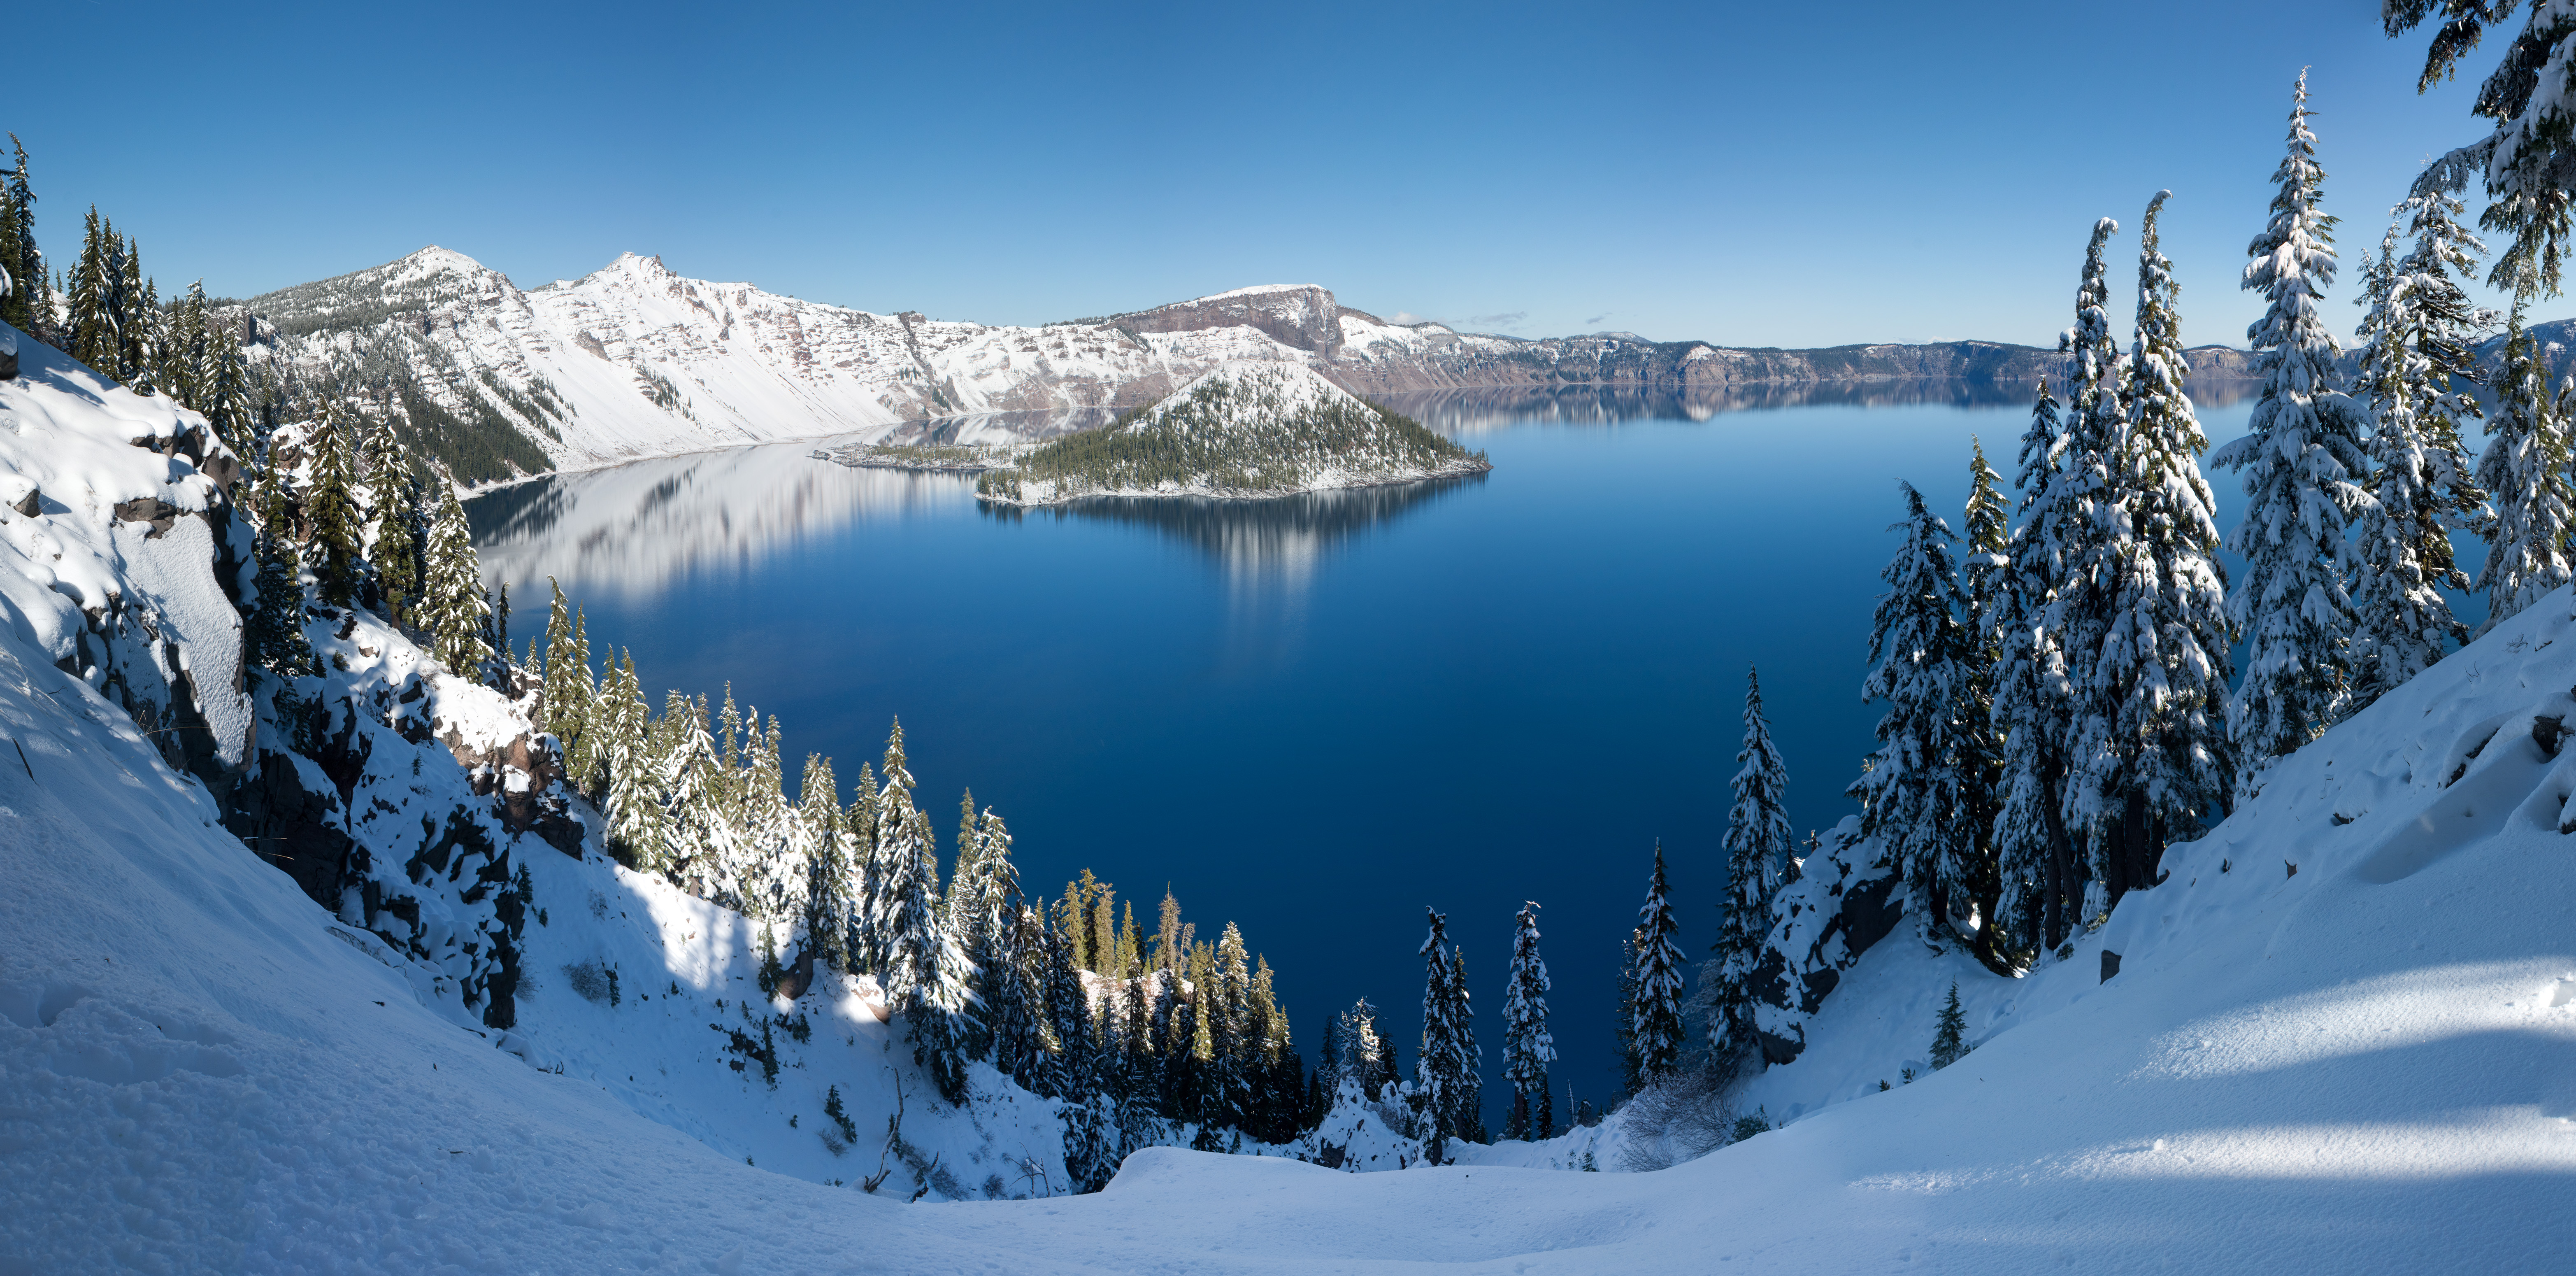 "Crater Lake Winter" by WolfmanSF